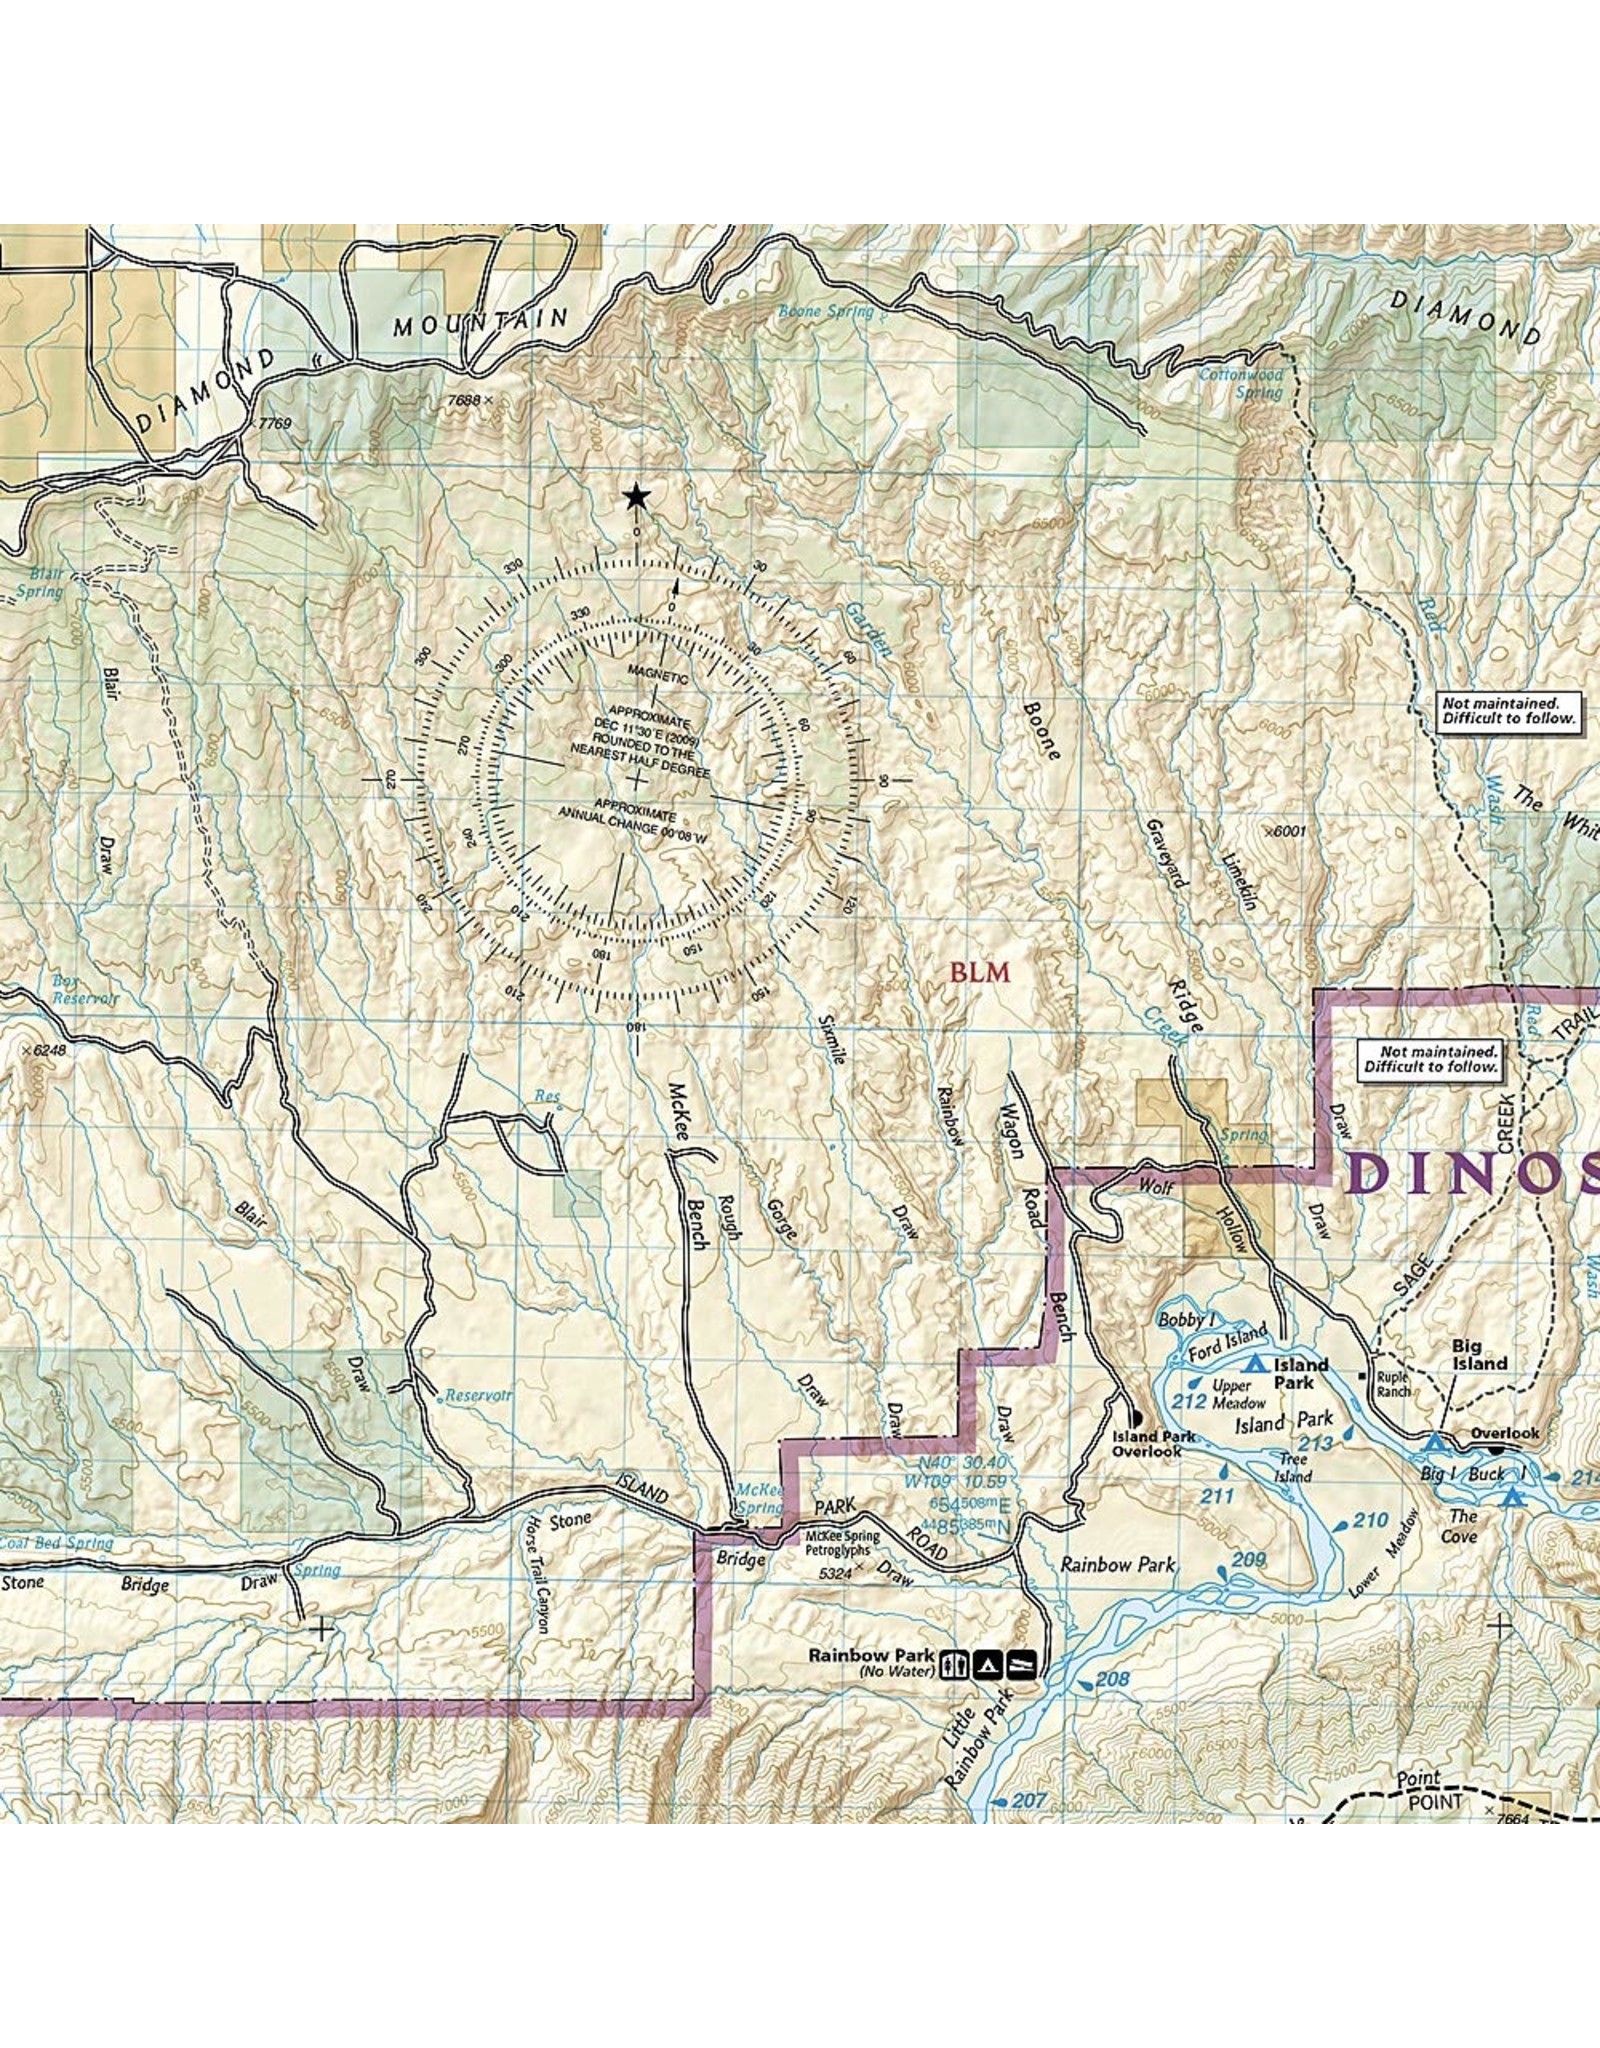 Dinosaur National Monument (National Geographic Trails Illustrated Map, 220) Map – Folded Map